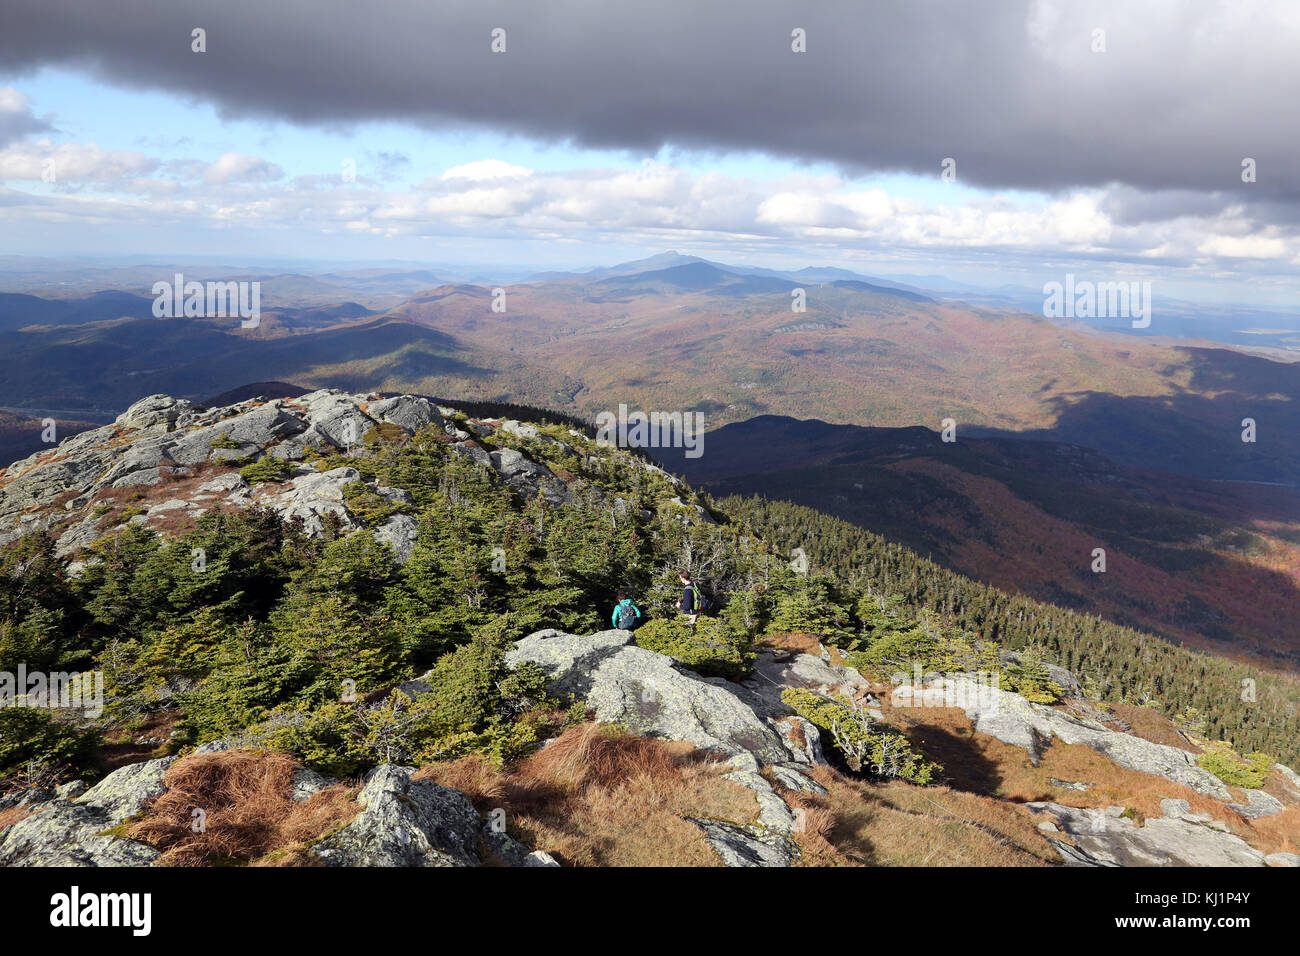 Looking north from the summit of Camel's Hump, VT, USA Stock Photo